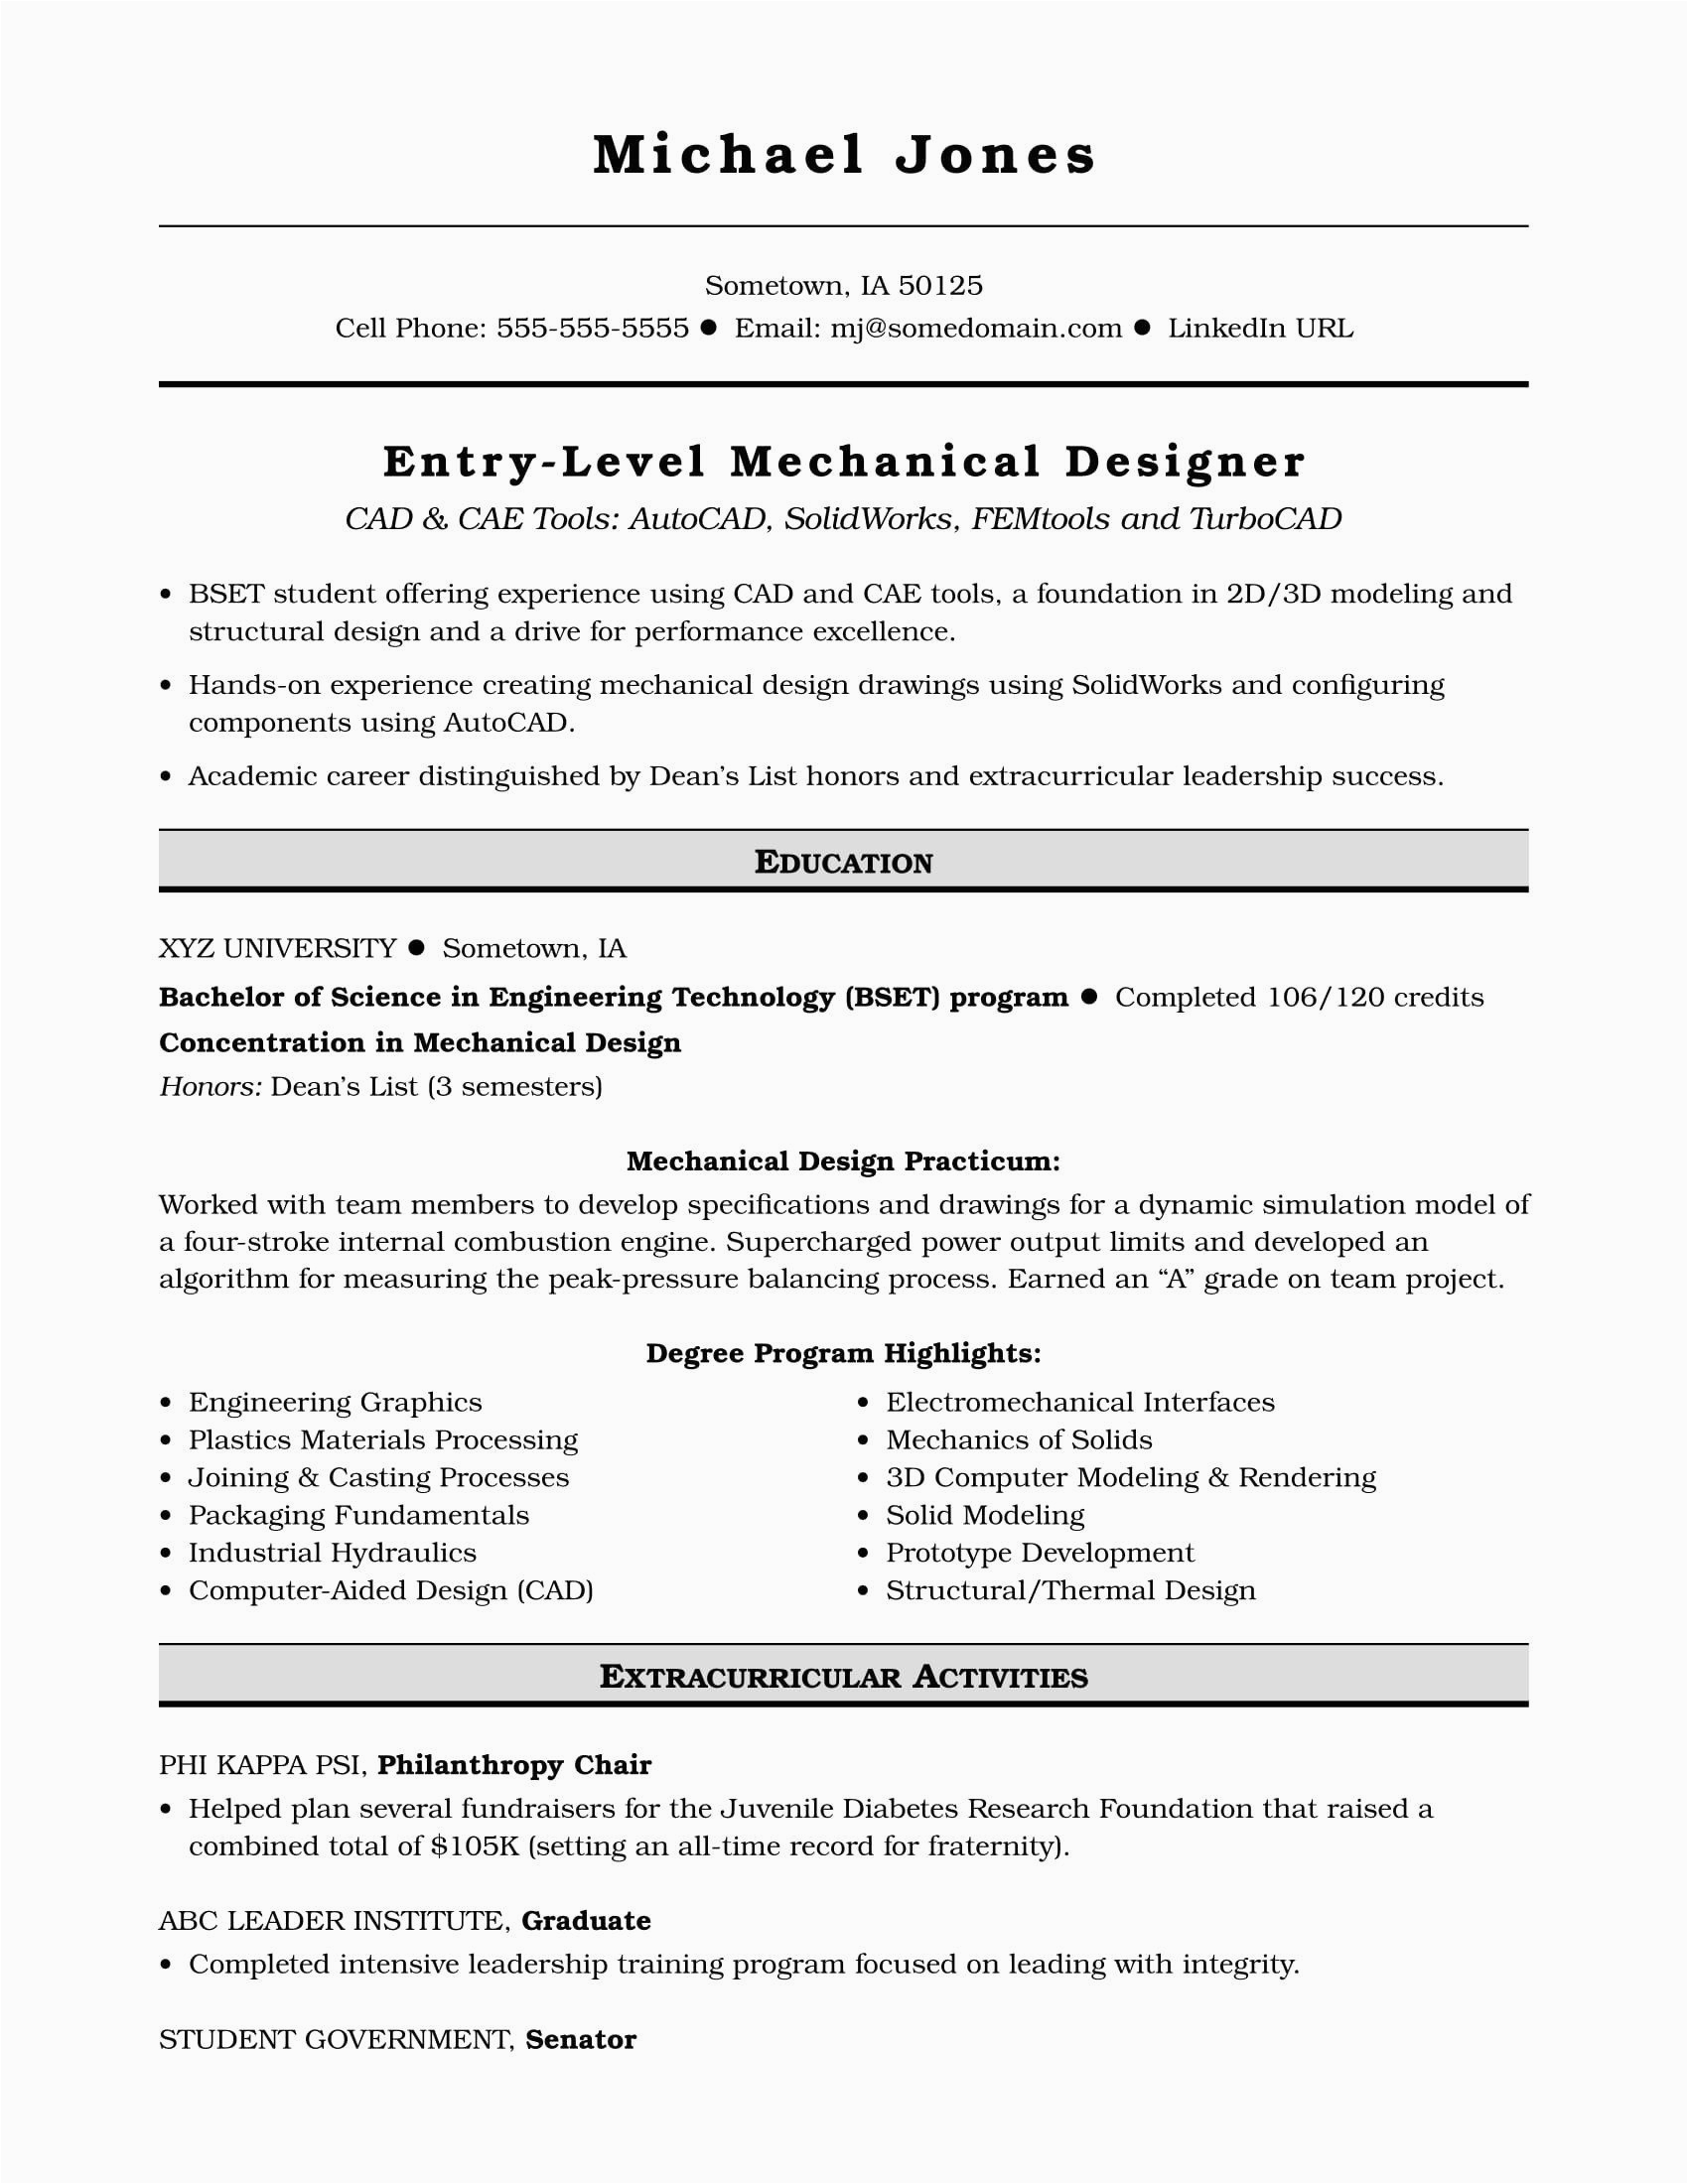 Sample Resume for Entry Level Mechanical Engineer Entry Level Mechanical Engineer Resume Best Resume Examples